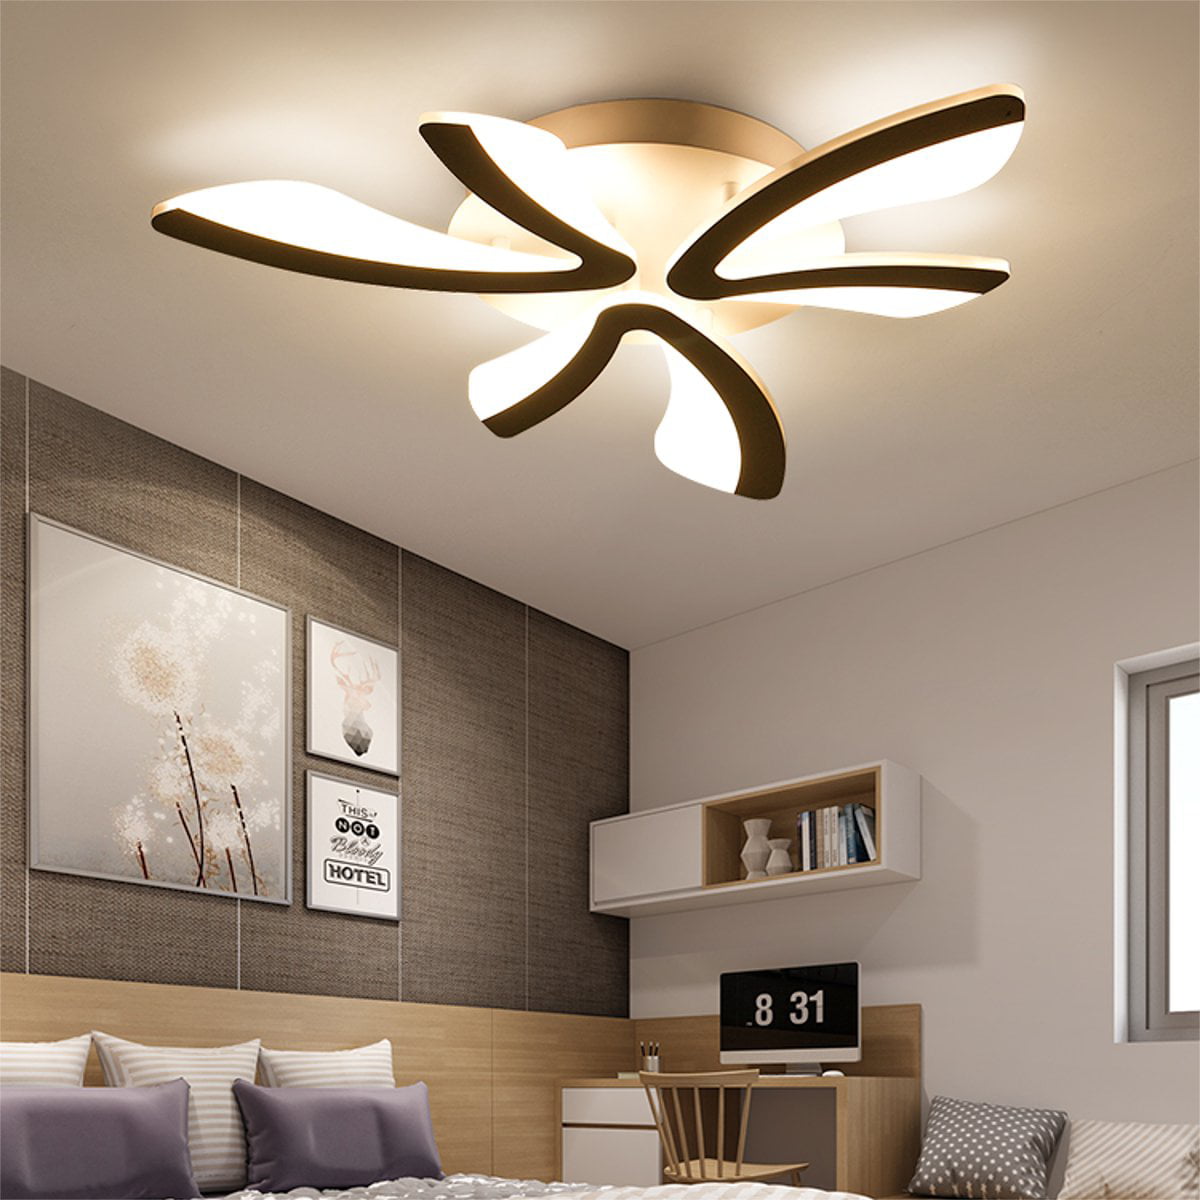 US LED Indoor Ceiling Lights Dimmable Remote Control Bedroom Wall Light Fixtures 